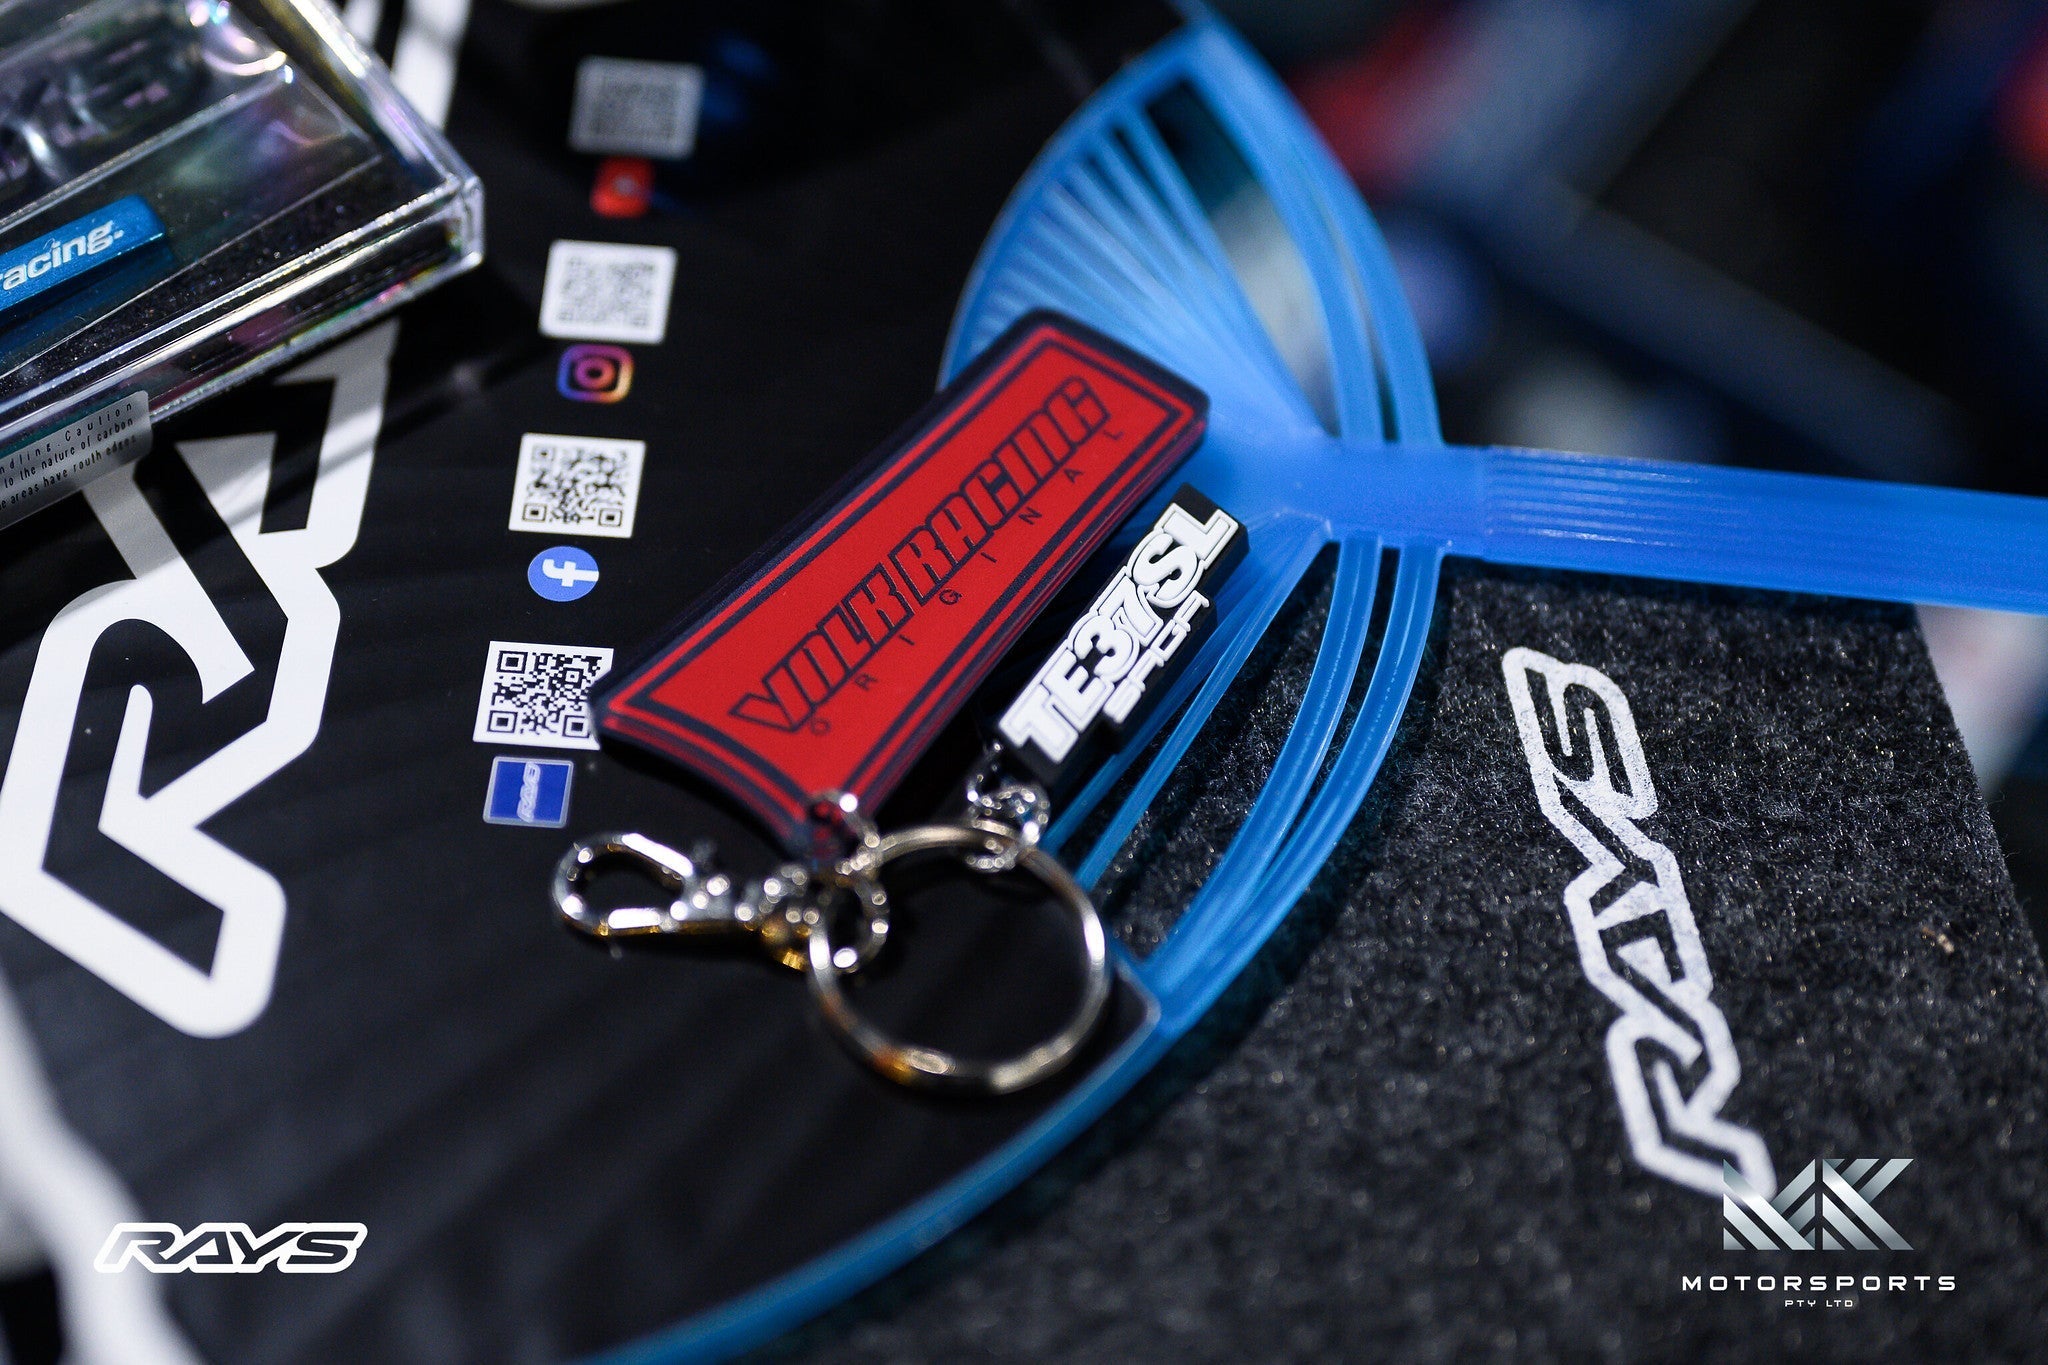 RAYS TE37SL Saga Keychain - Premium  from Merch - From just $10.00! Shop now at MK MOTORSPORTS